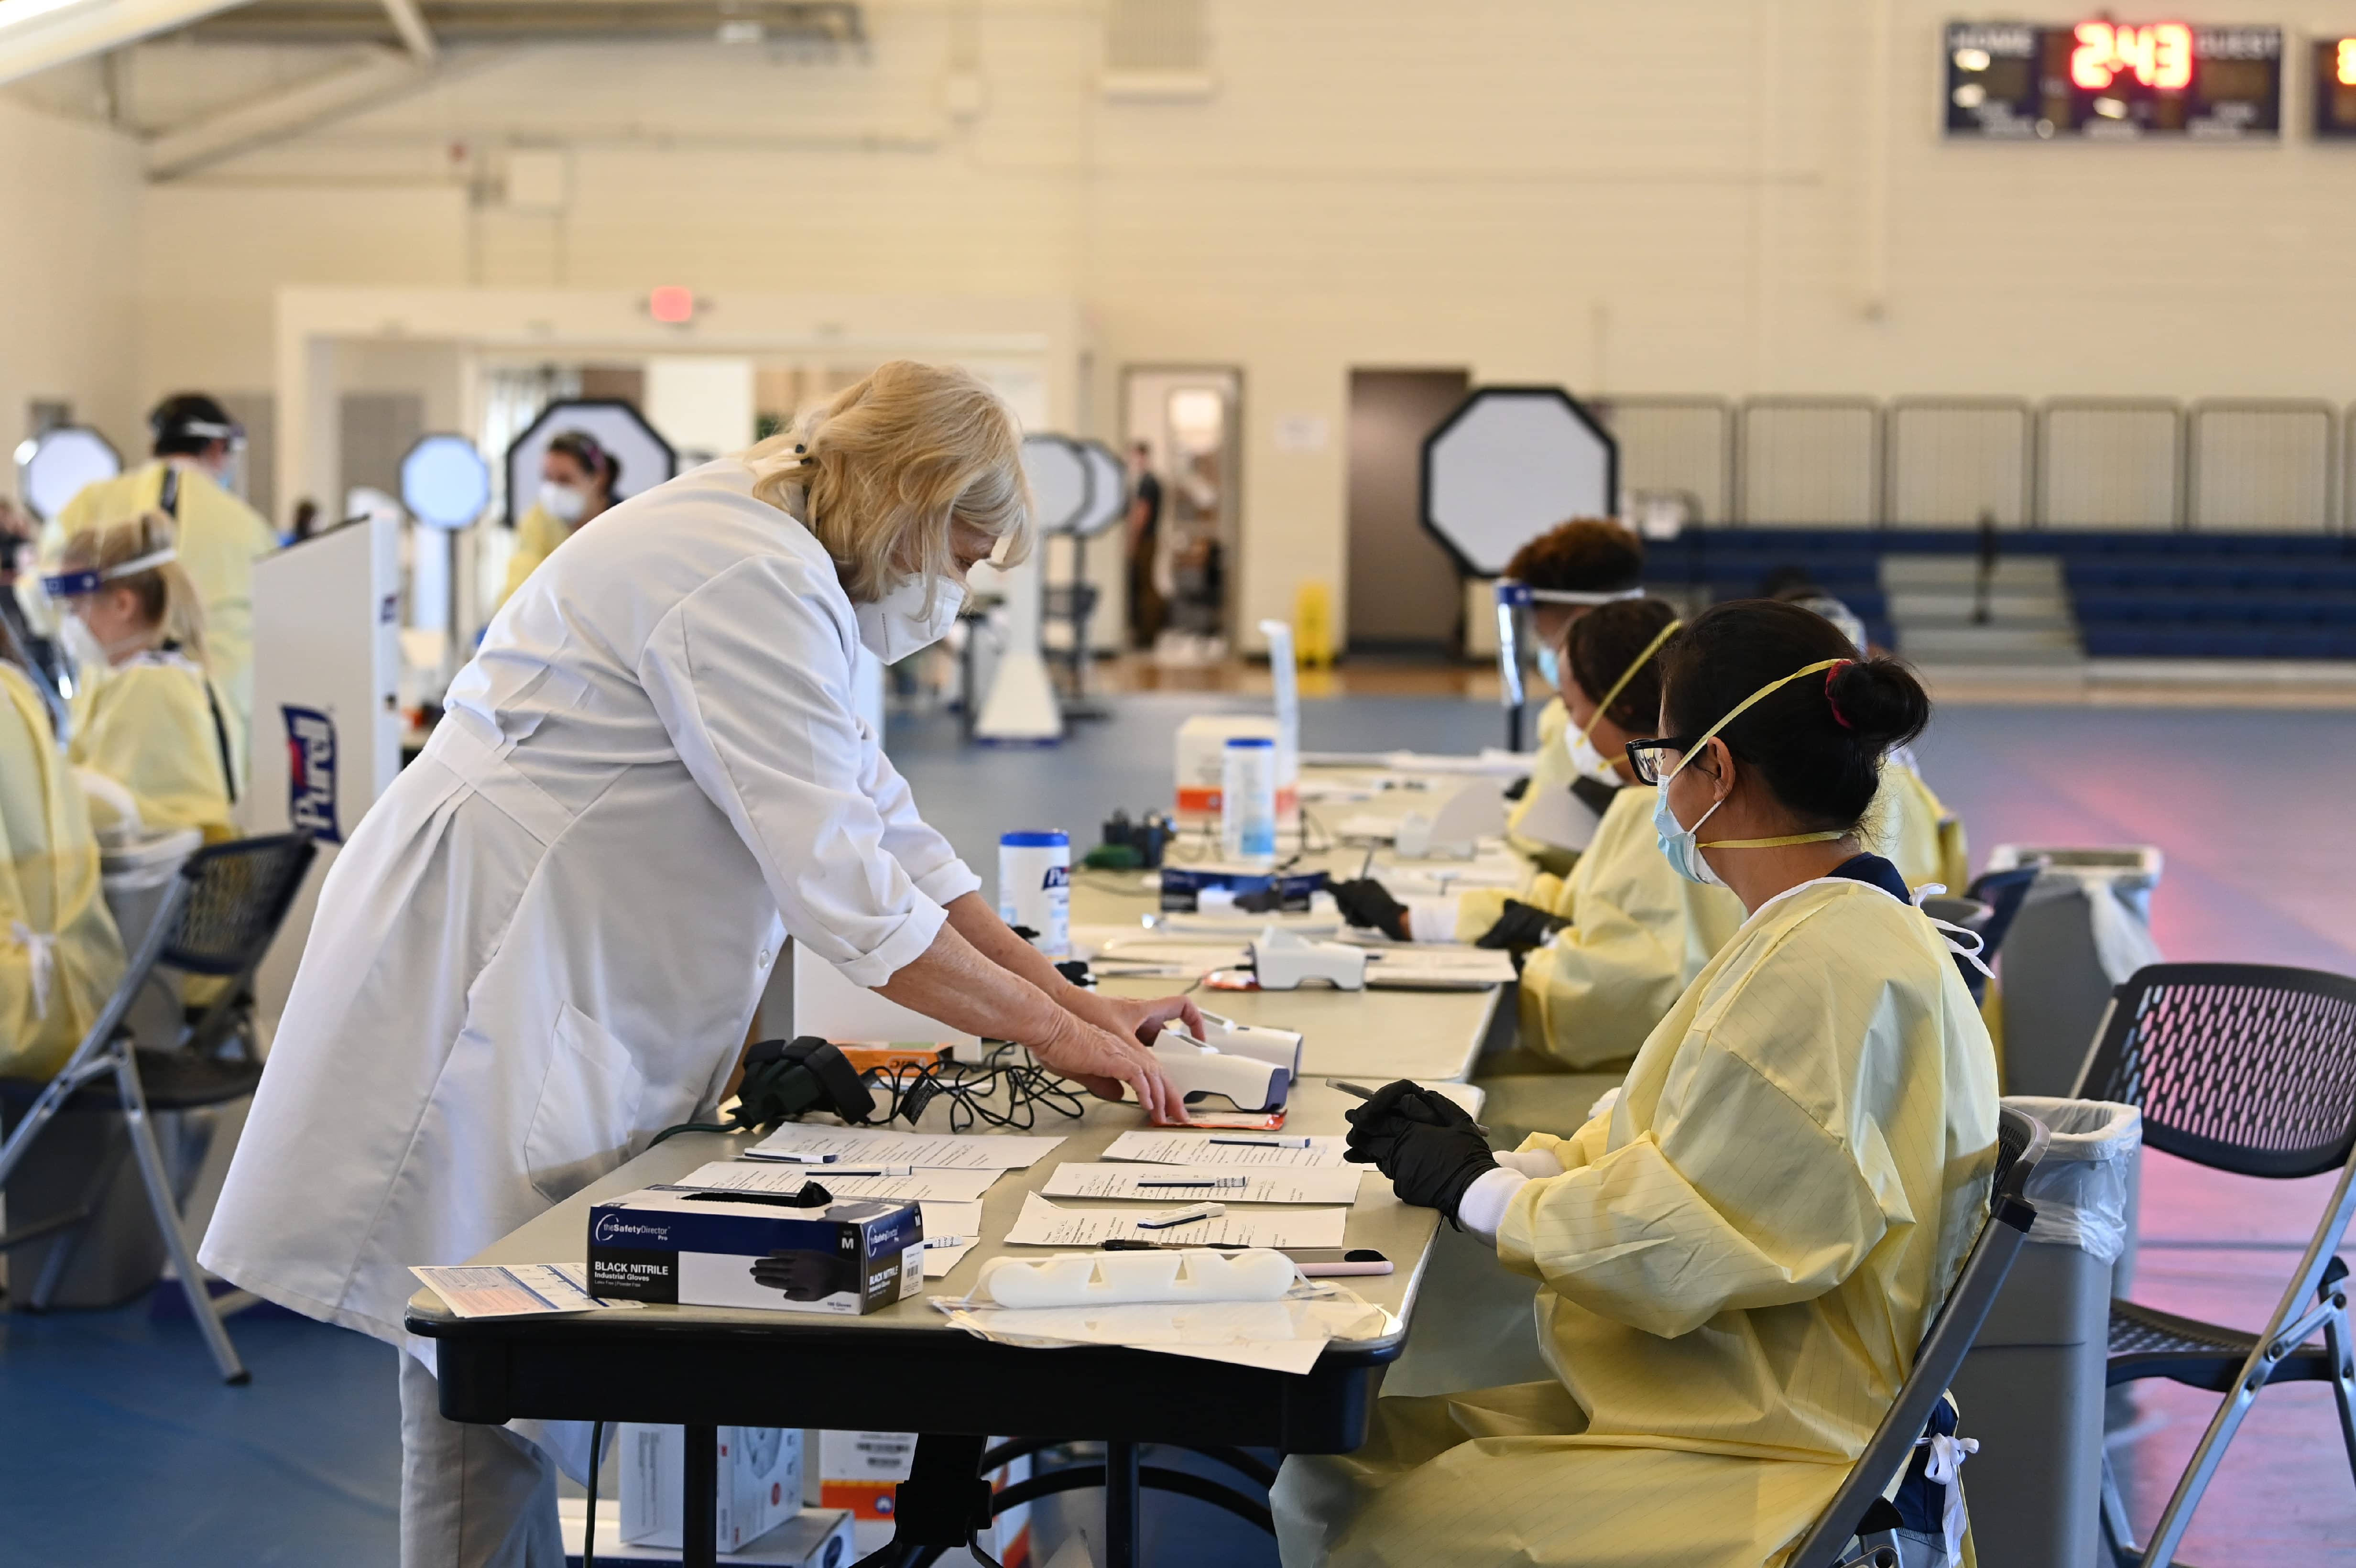 Professor in lab coat demonstrating medical equipment to students in sterile uniforms